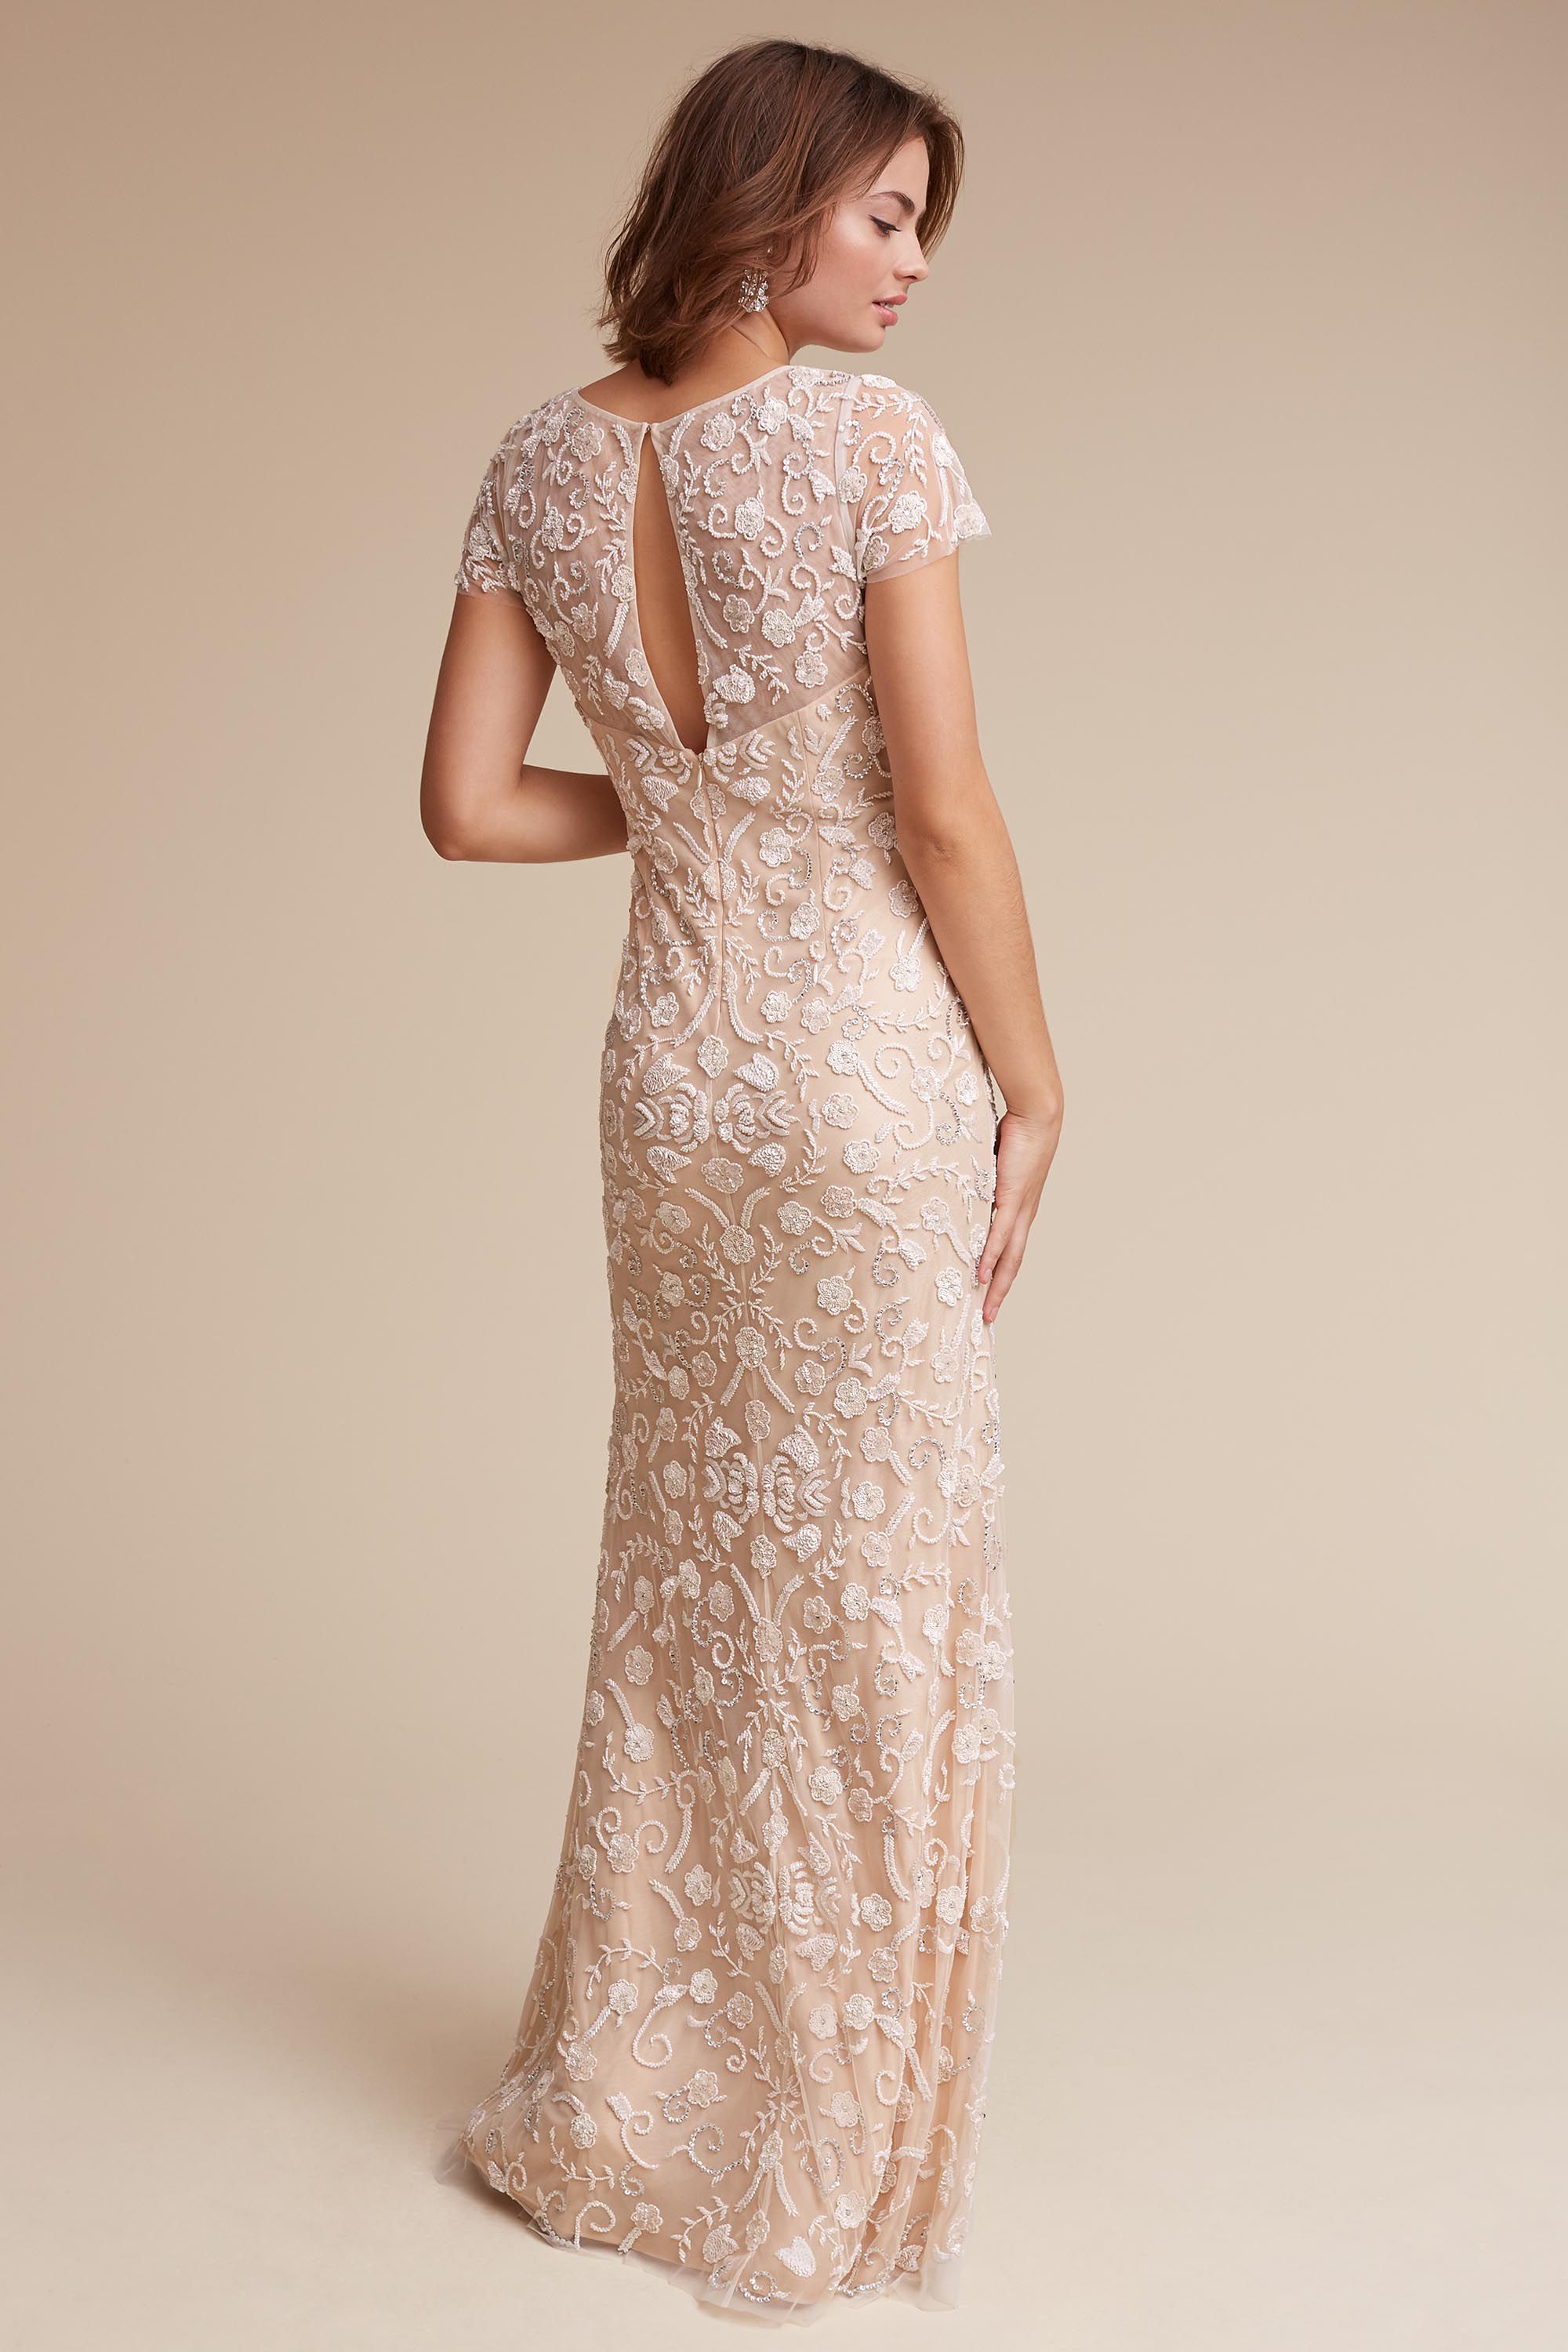 Essex Gown in Sale | BHLDN